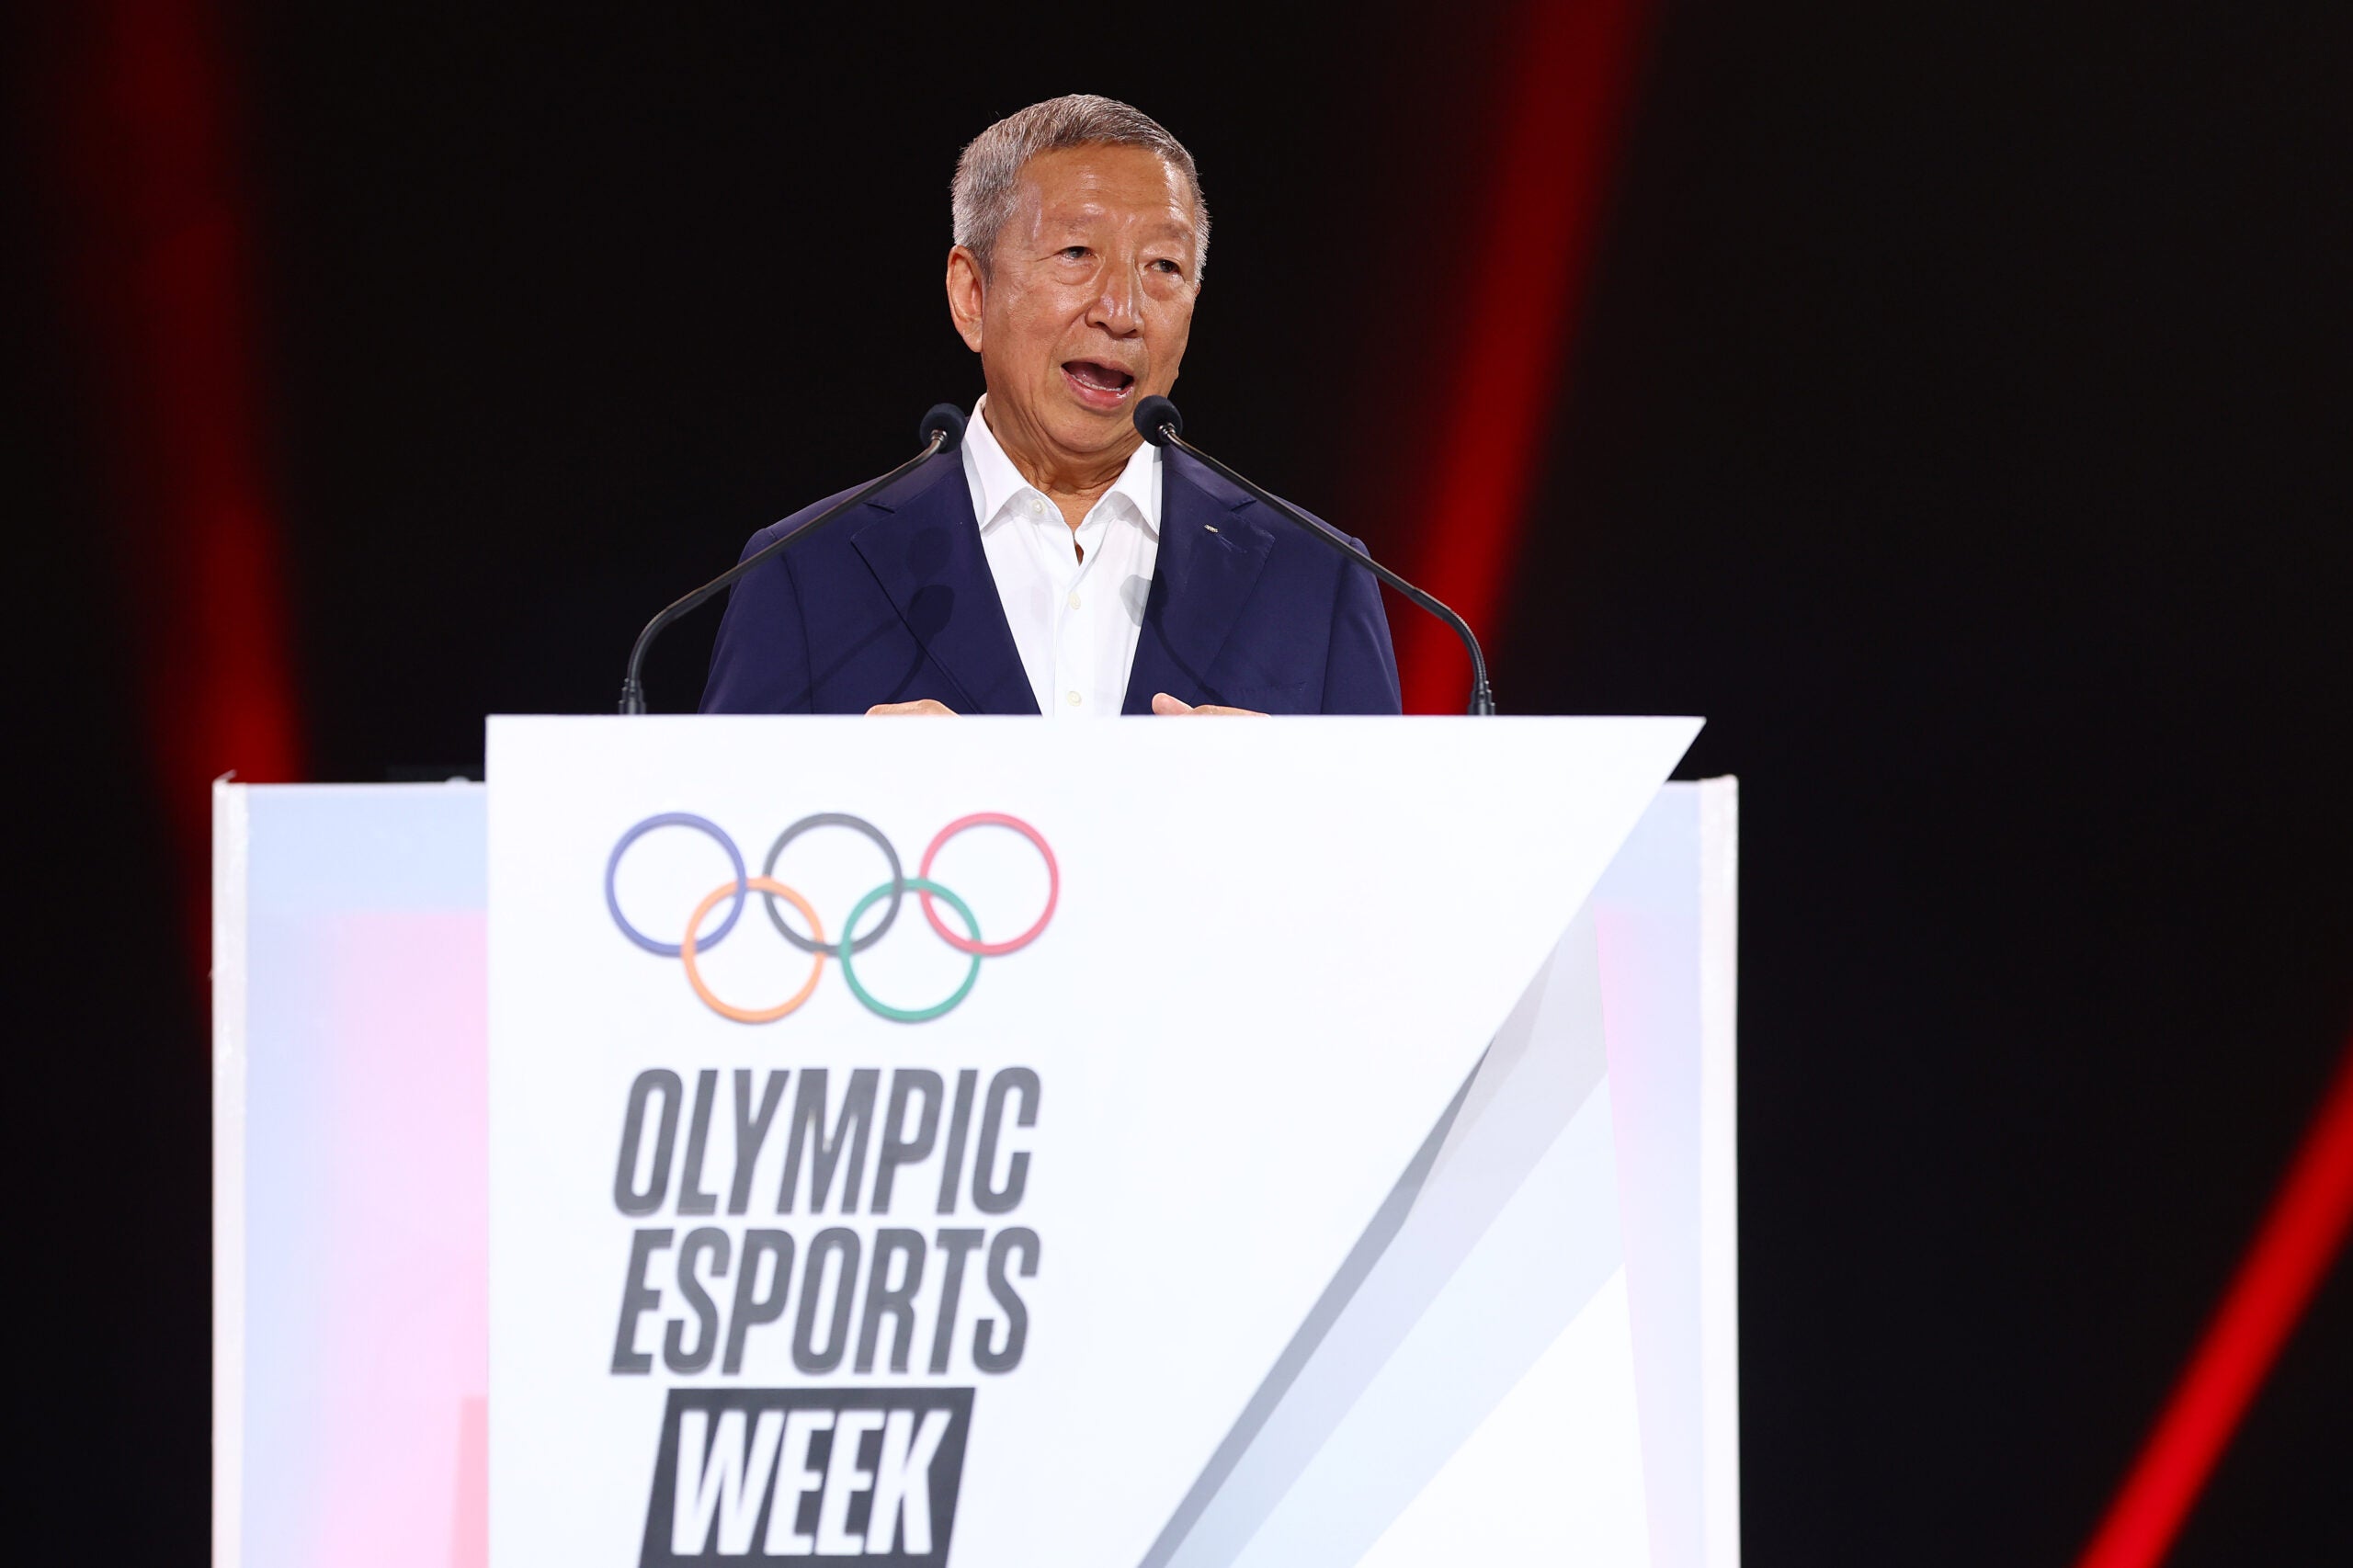 IOC Vice President Ng Ser Miang delivers a speech during the closing ceremony on day four of the Olympic Esports Week in Singapore.